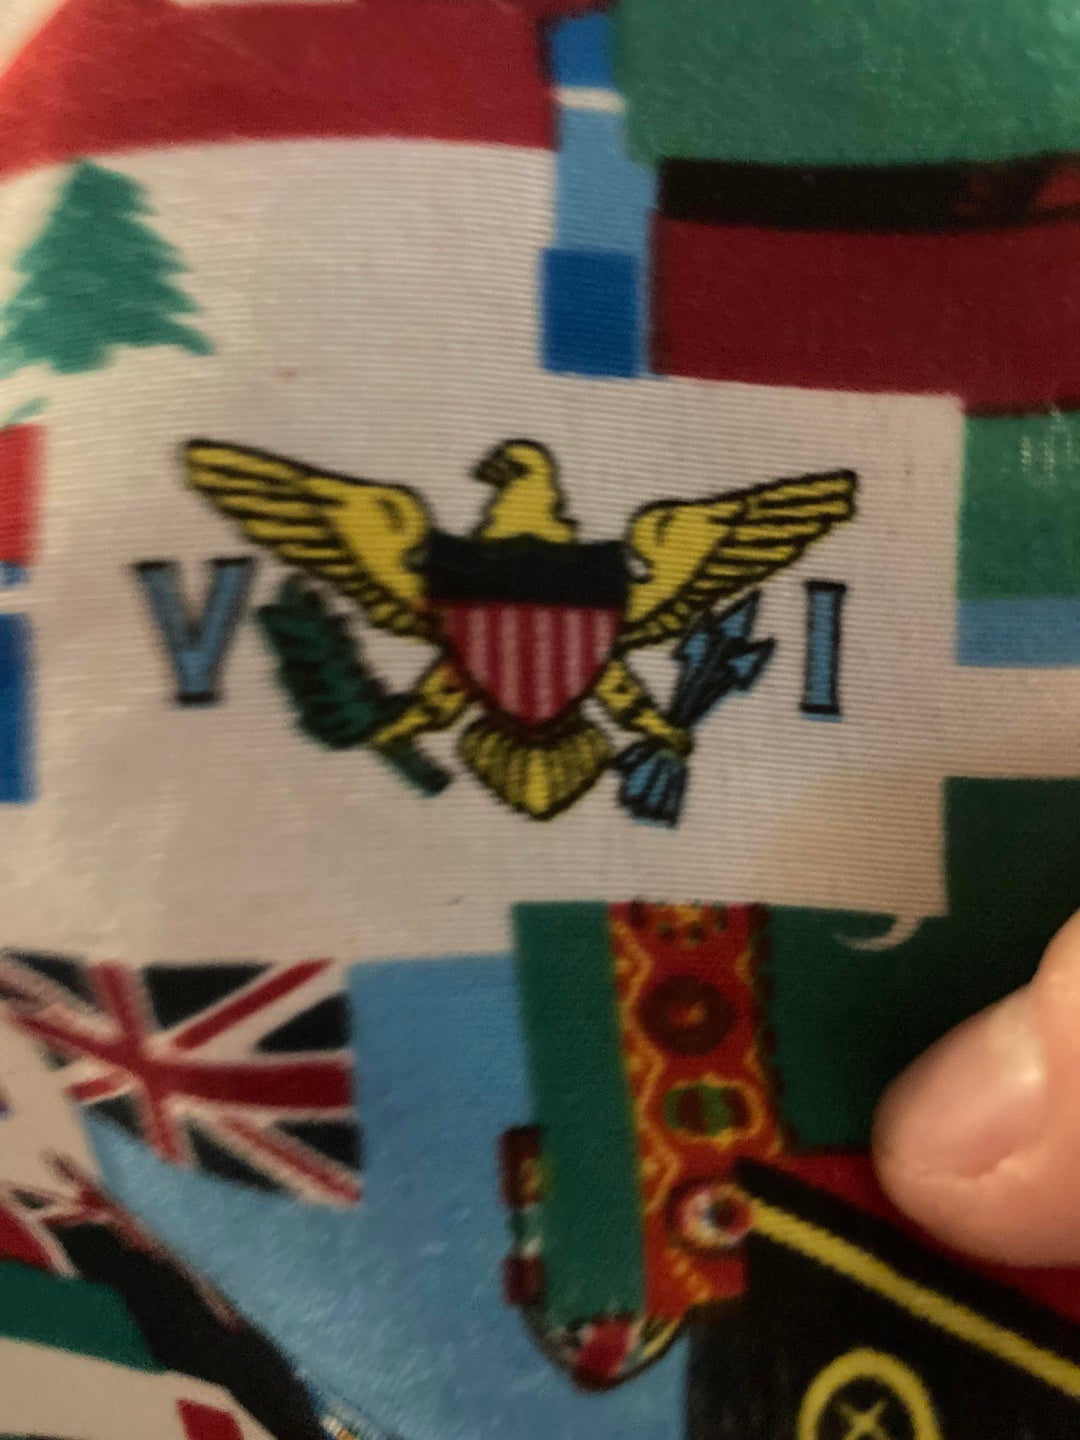 My friend has this Bandanna with lots of flags and I recognized all but this one. Anyone know what it is?